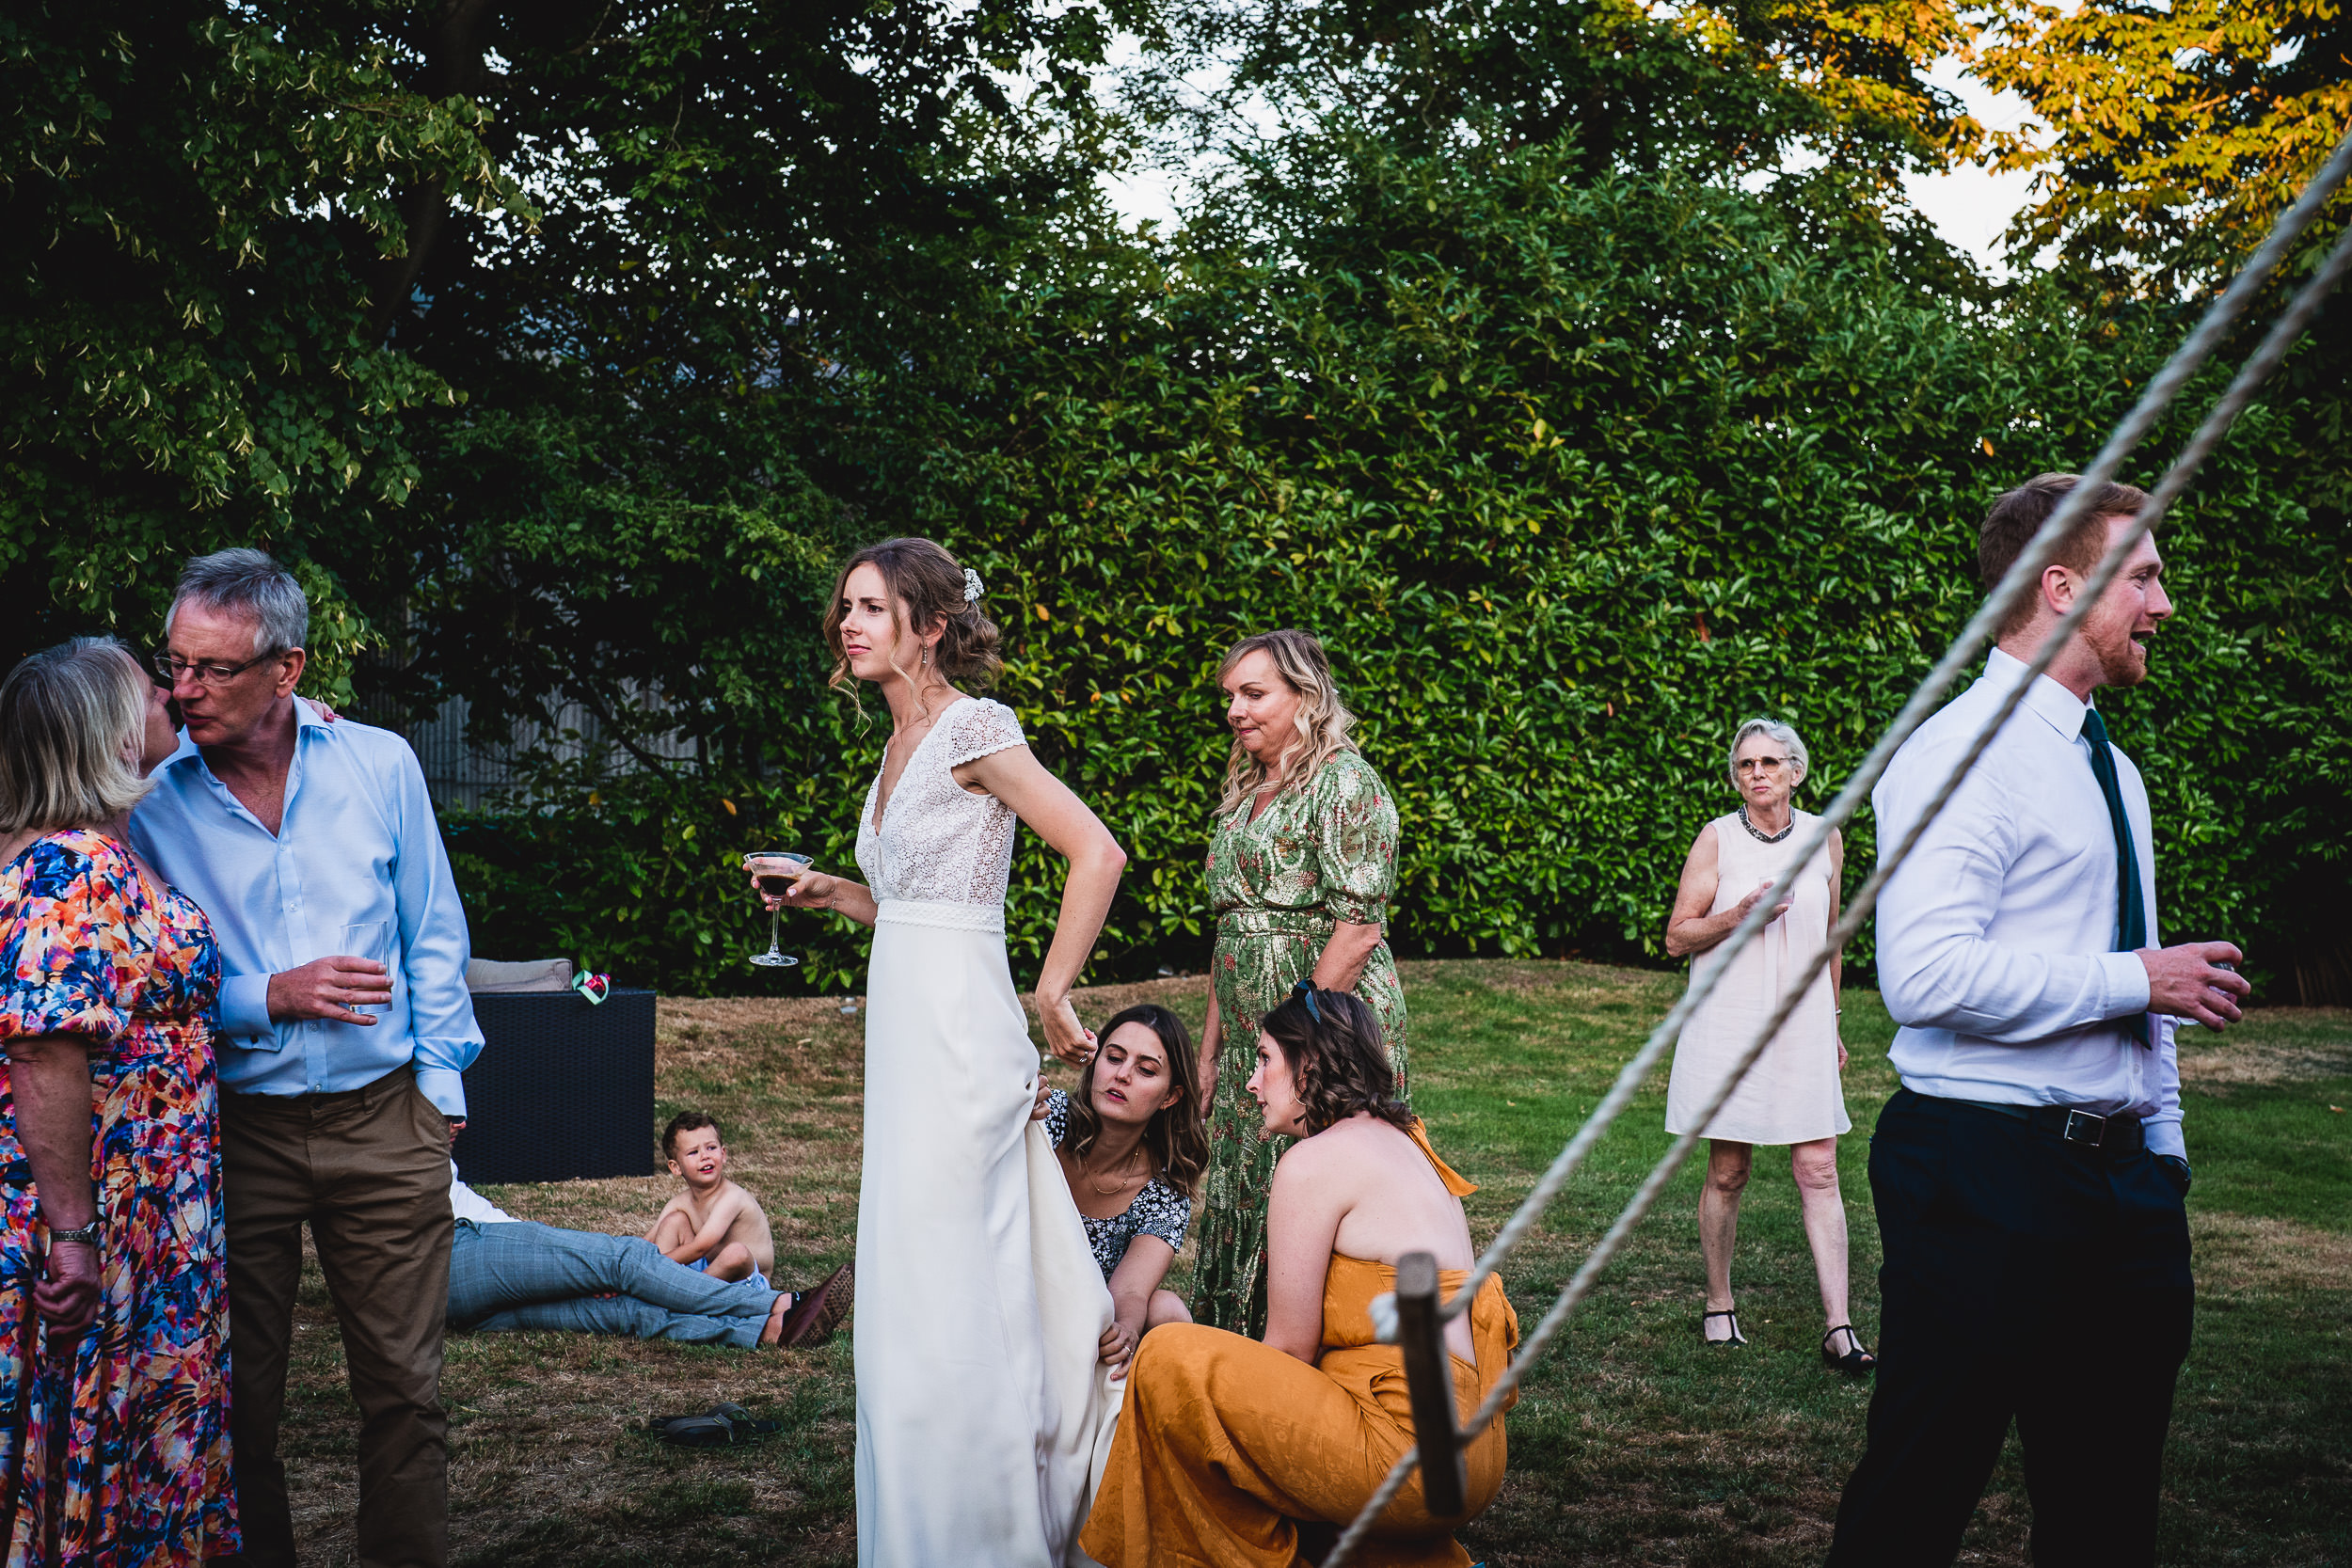 A group of people, including the groom, standing around a swing in a garden.